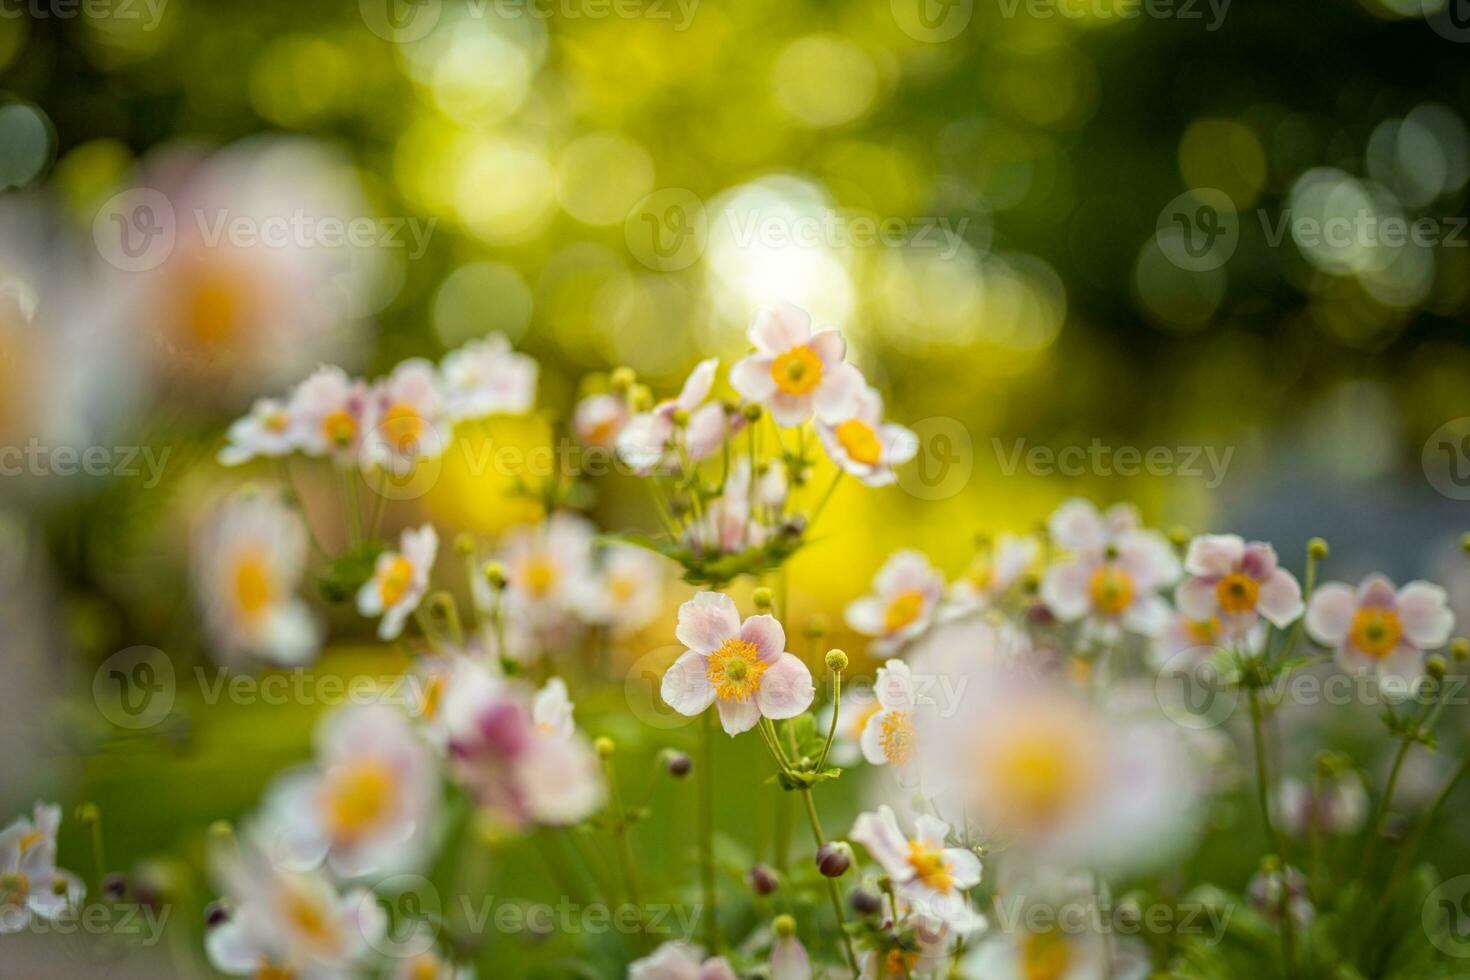 Spring forest landscape purple flowers primroses on a beautiful blurred background macro. Floral nature background, summer spring background. Tranquil nature close-up, romantic love flowers photo